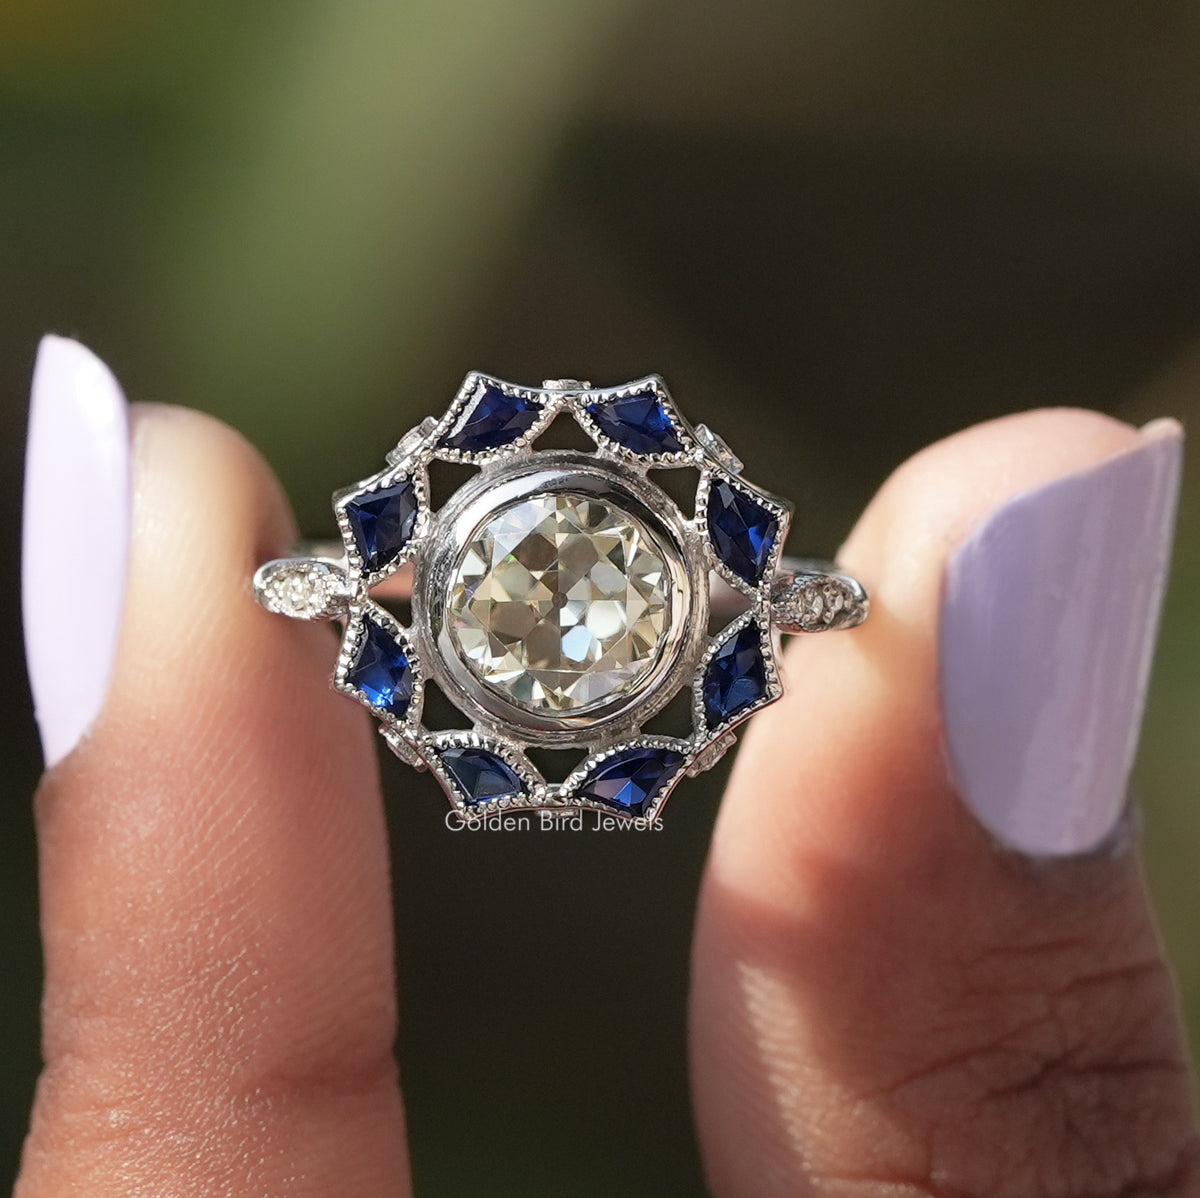 [In two finger front view of old european round cut bezel setting moissanite ring]-[Golden Bird Jewels]